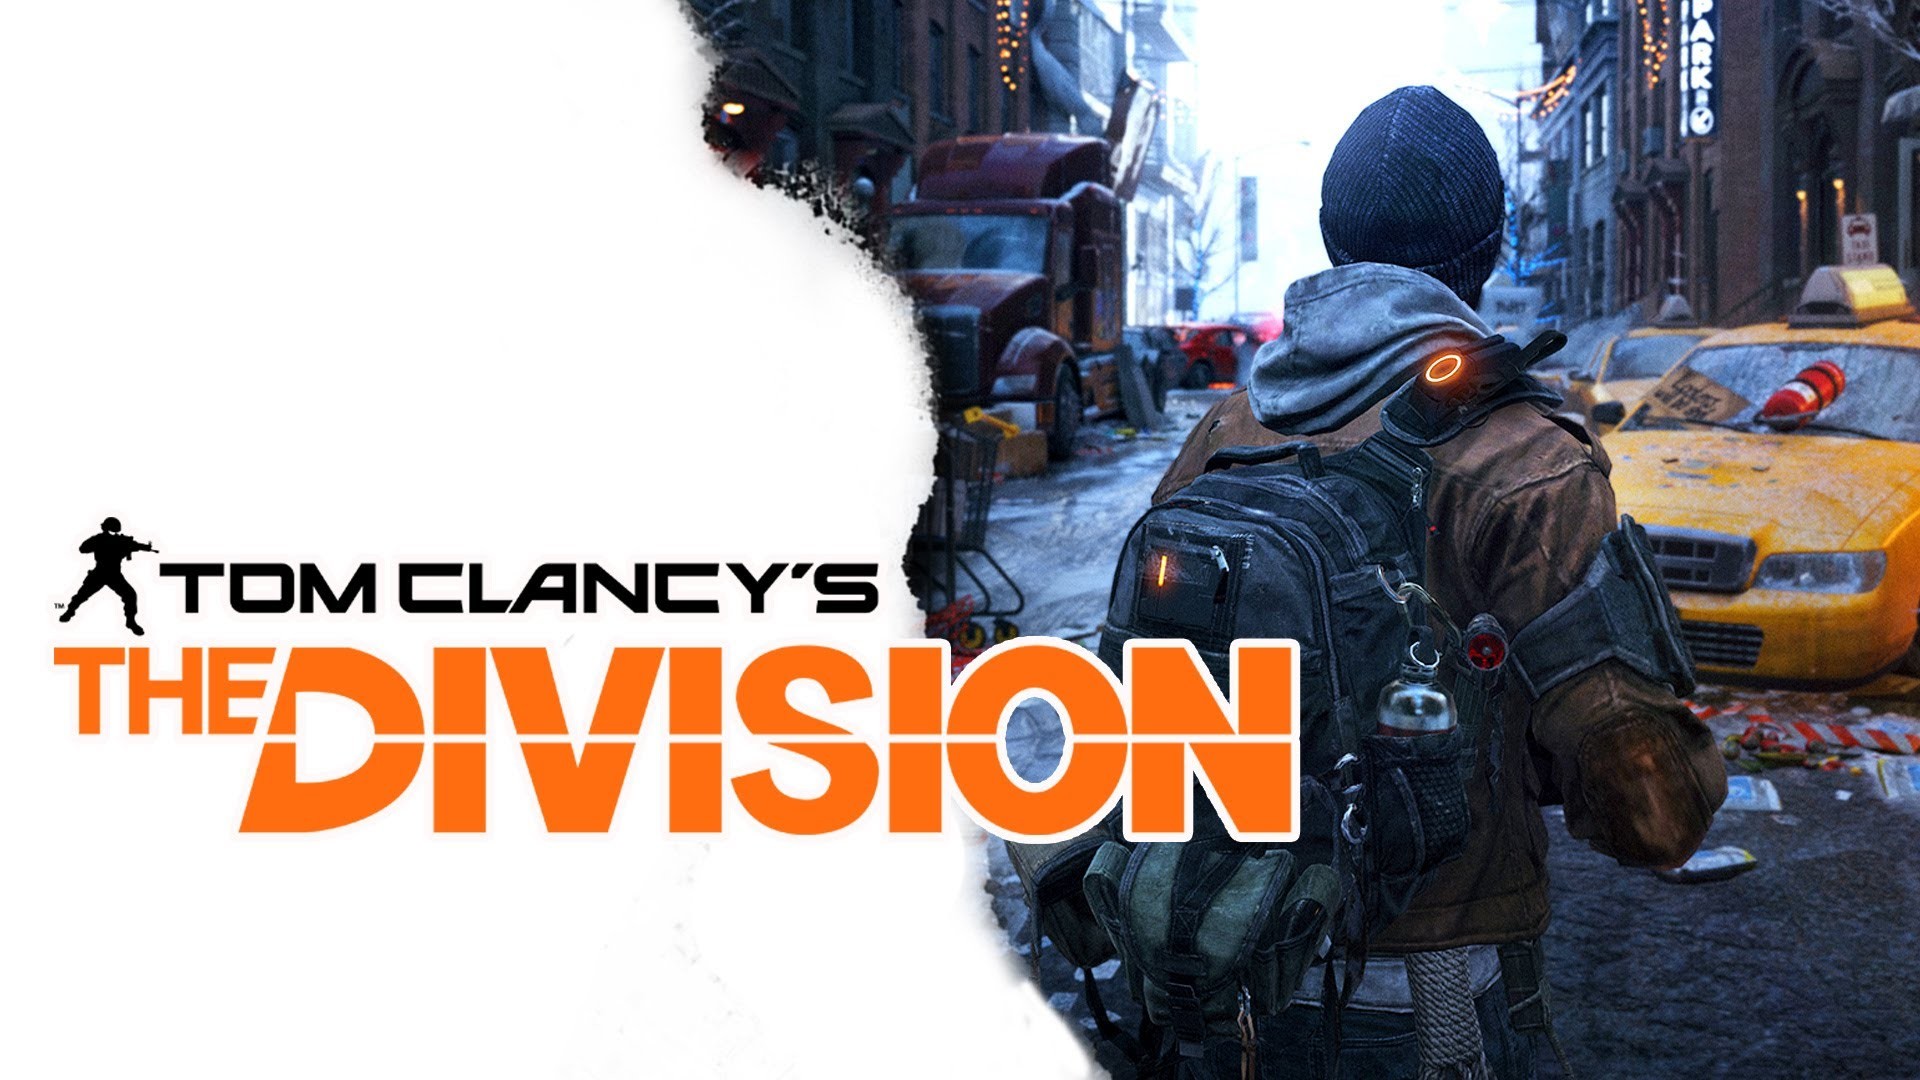 tom clancy's the division wallpaper hd Wallpaper